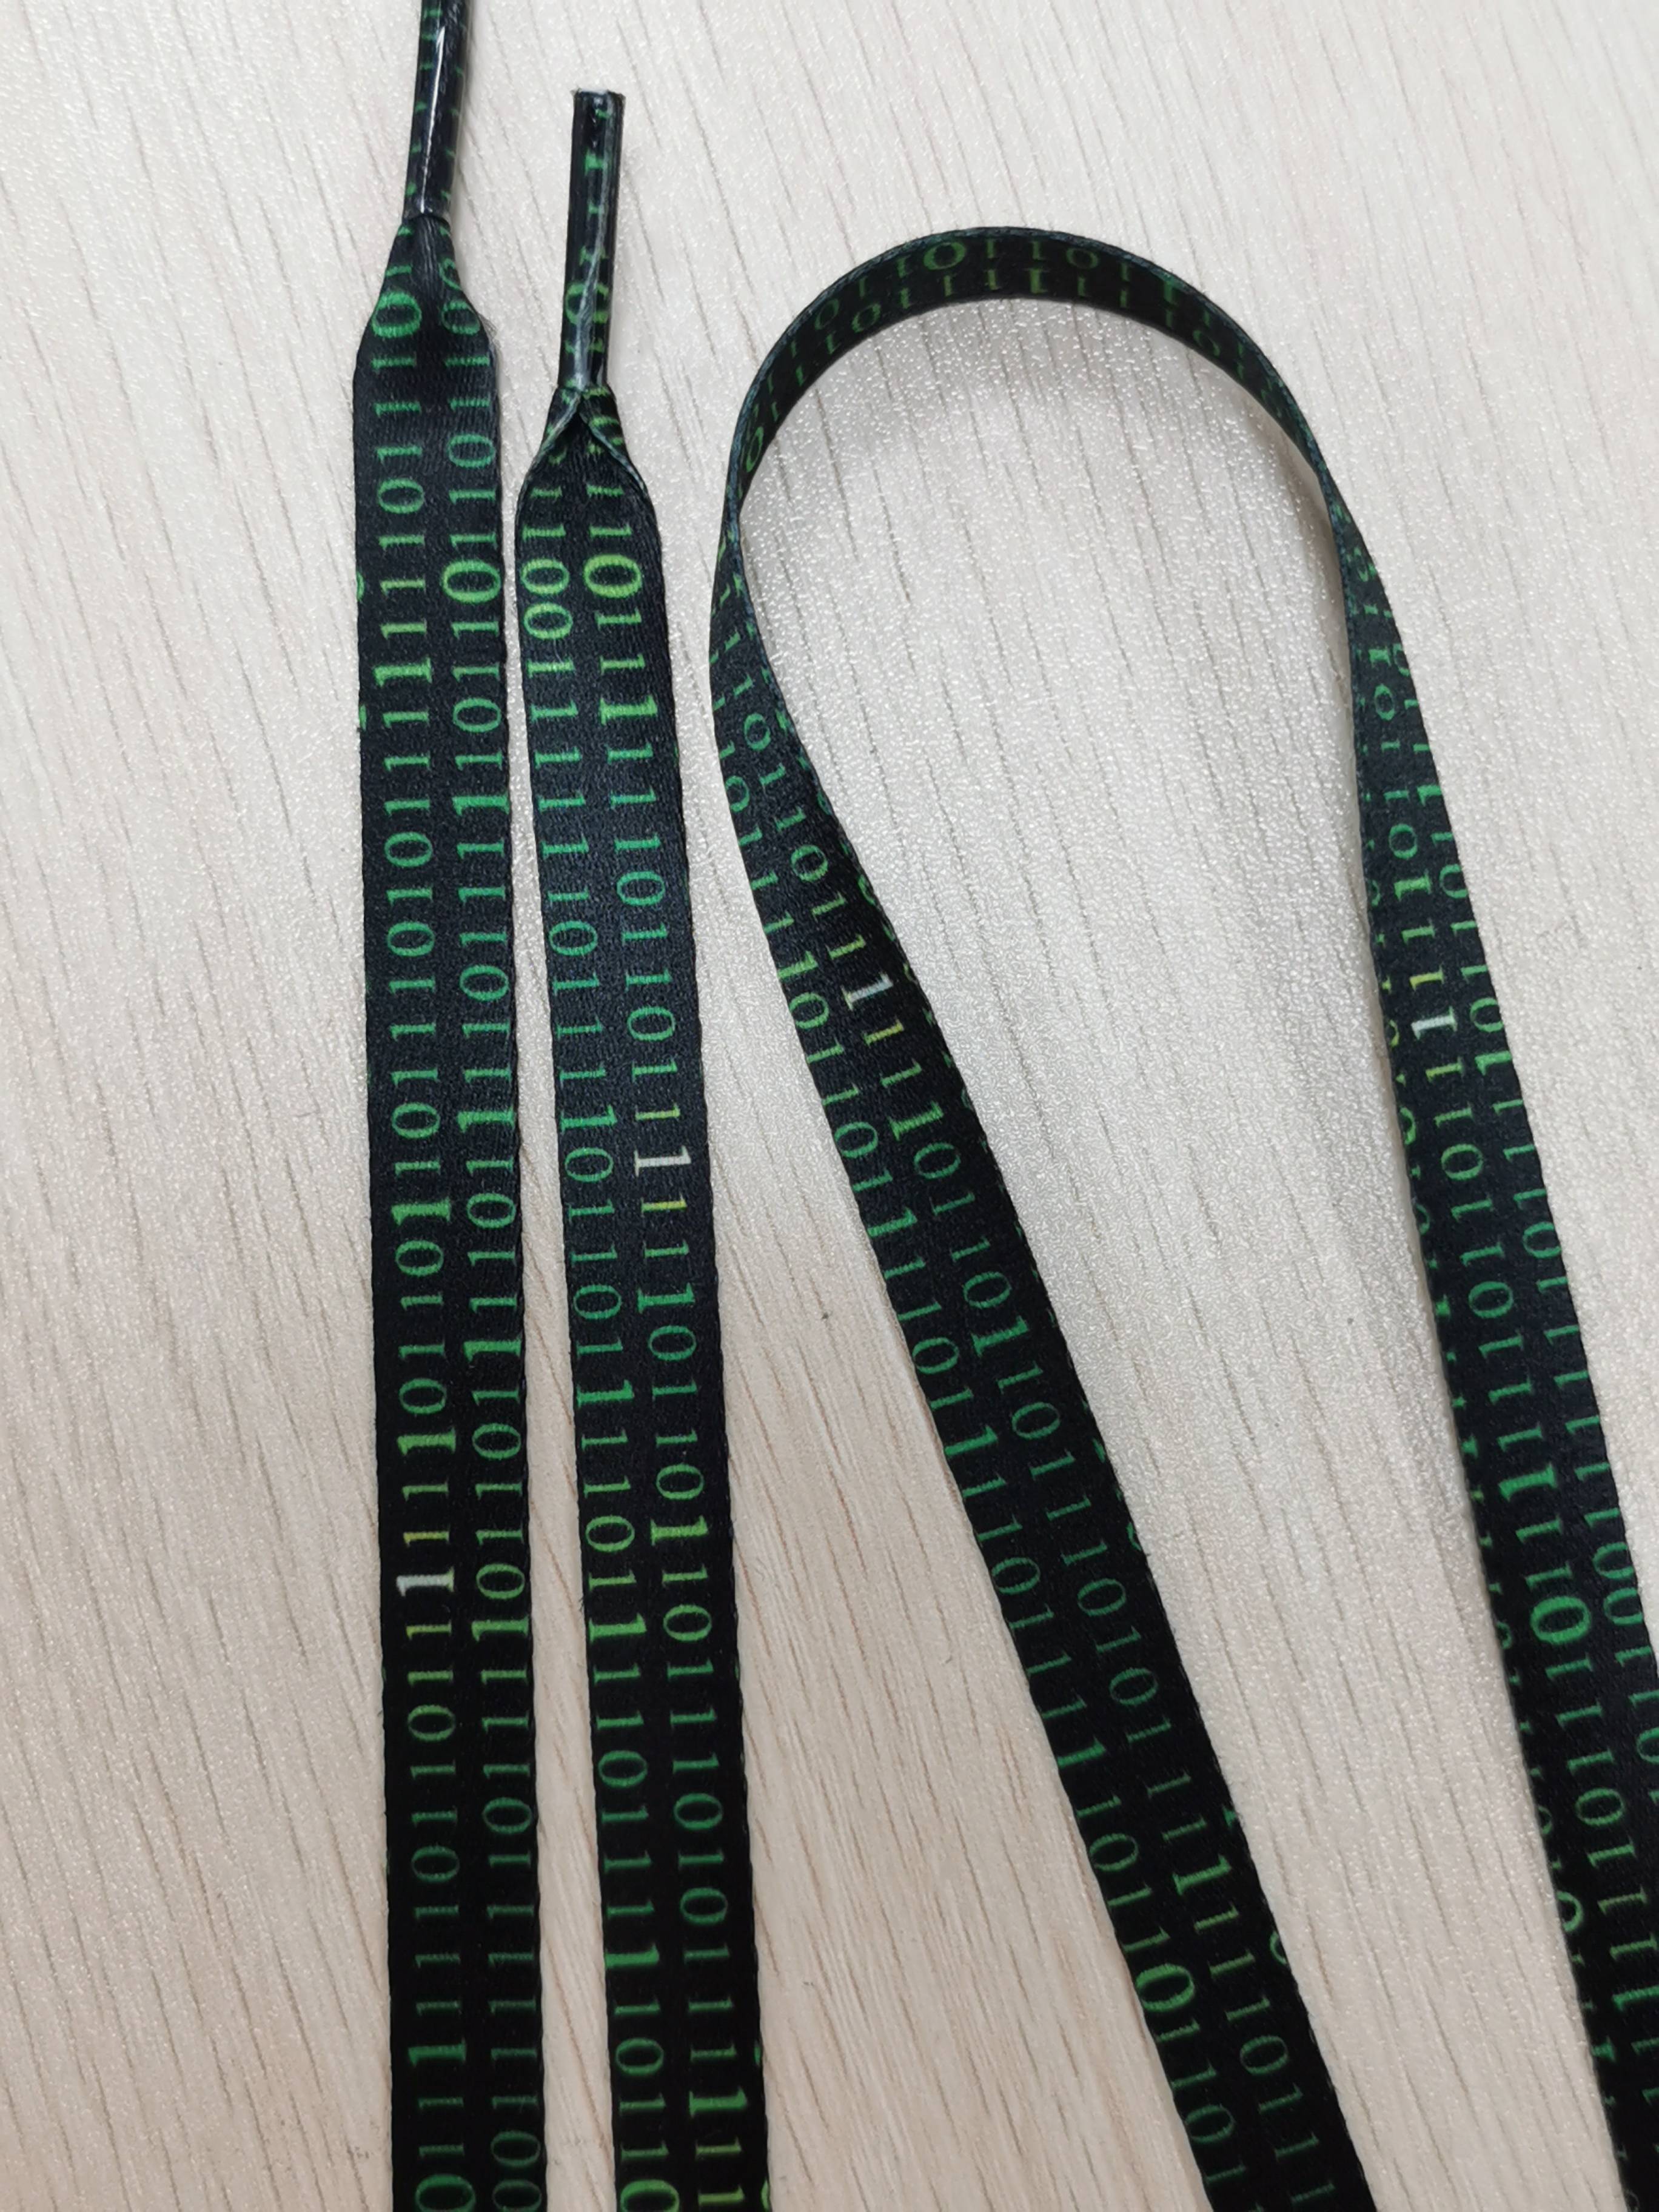 WIRESTER 1 Pair Replacement Shoelaces Fashion Shoestrings forHiking Shoes, Sport Shoes, Boots, Sneakers, Outdoor - Green Binary Code - image 3 of 7